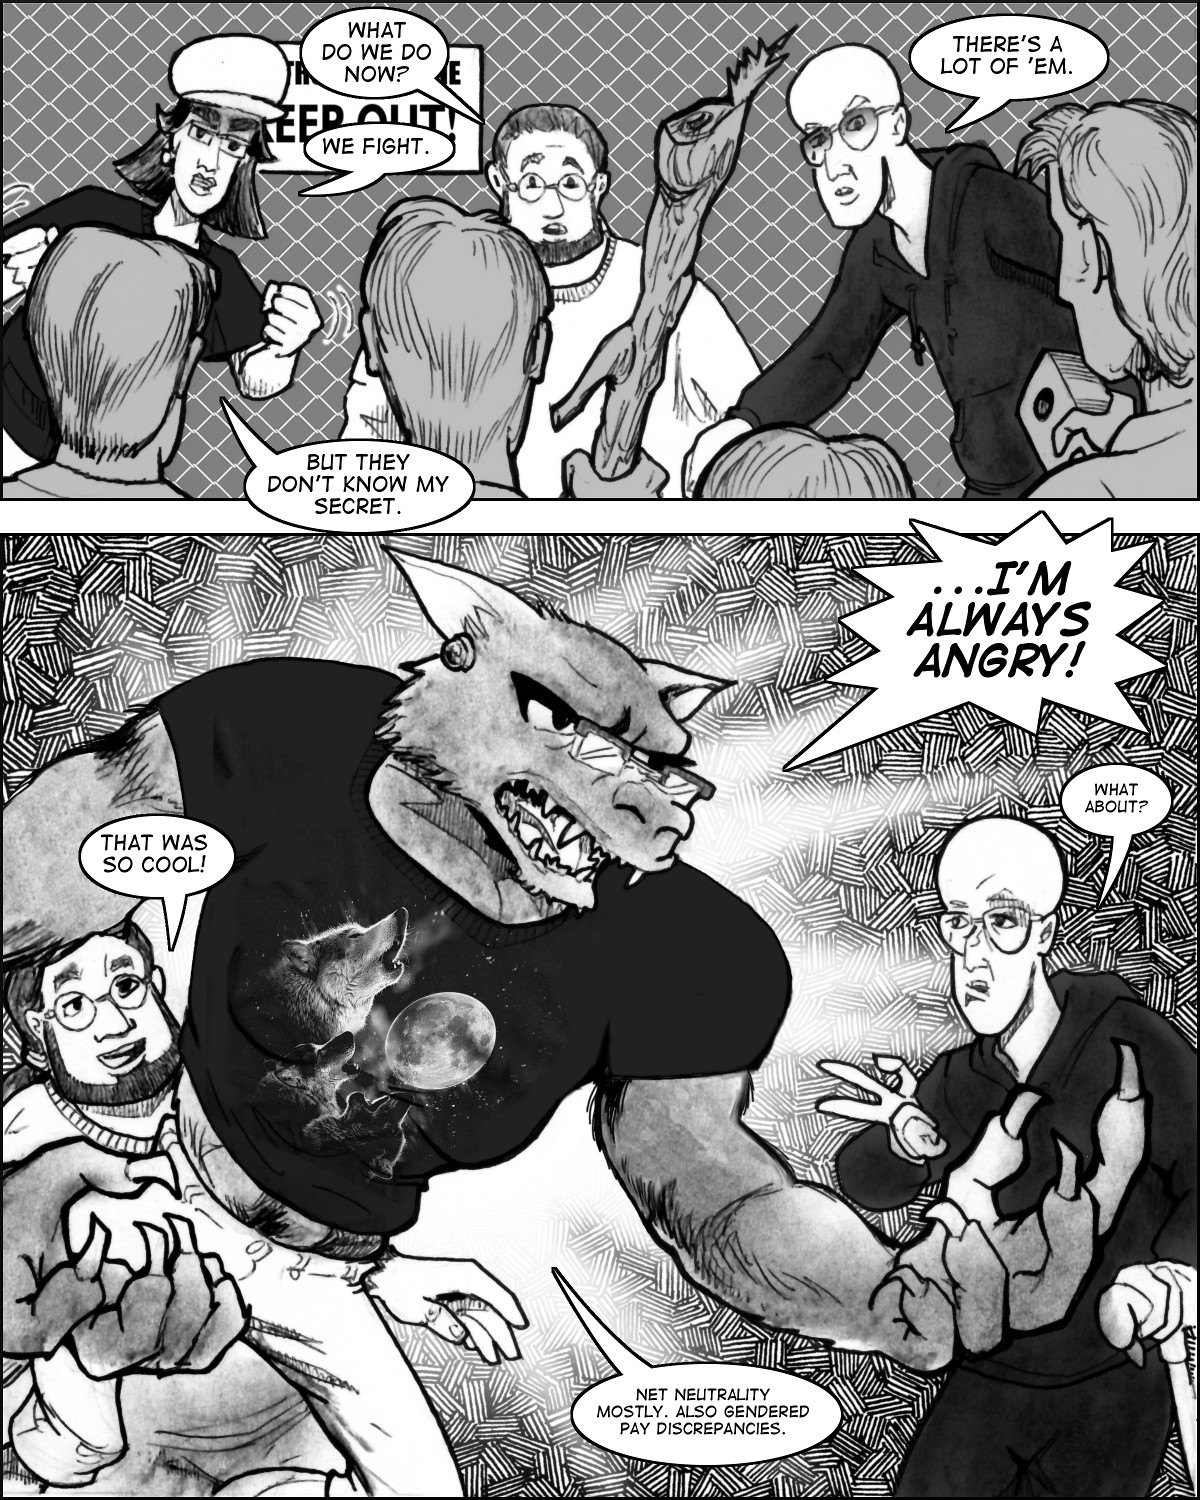 Nothing like a werewolf for dealing with an angry mob.